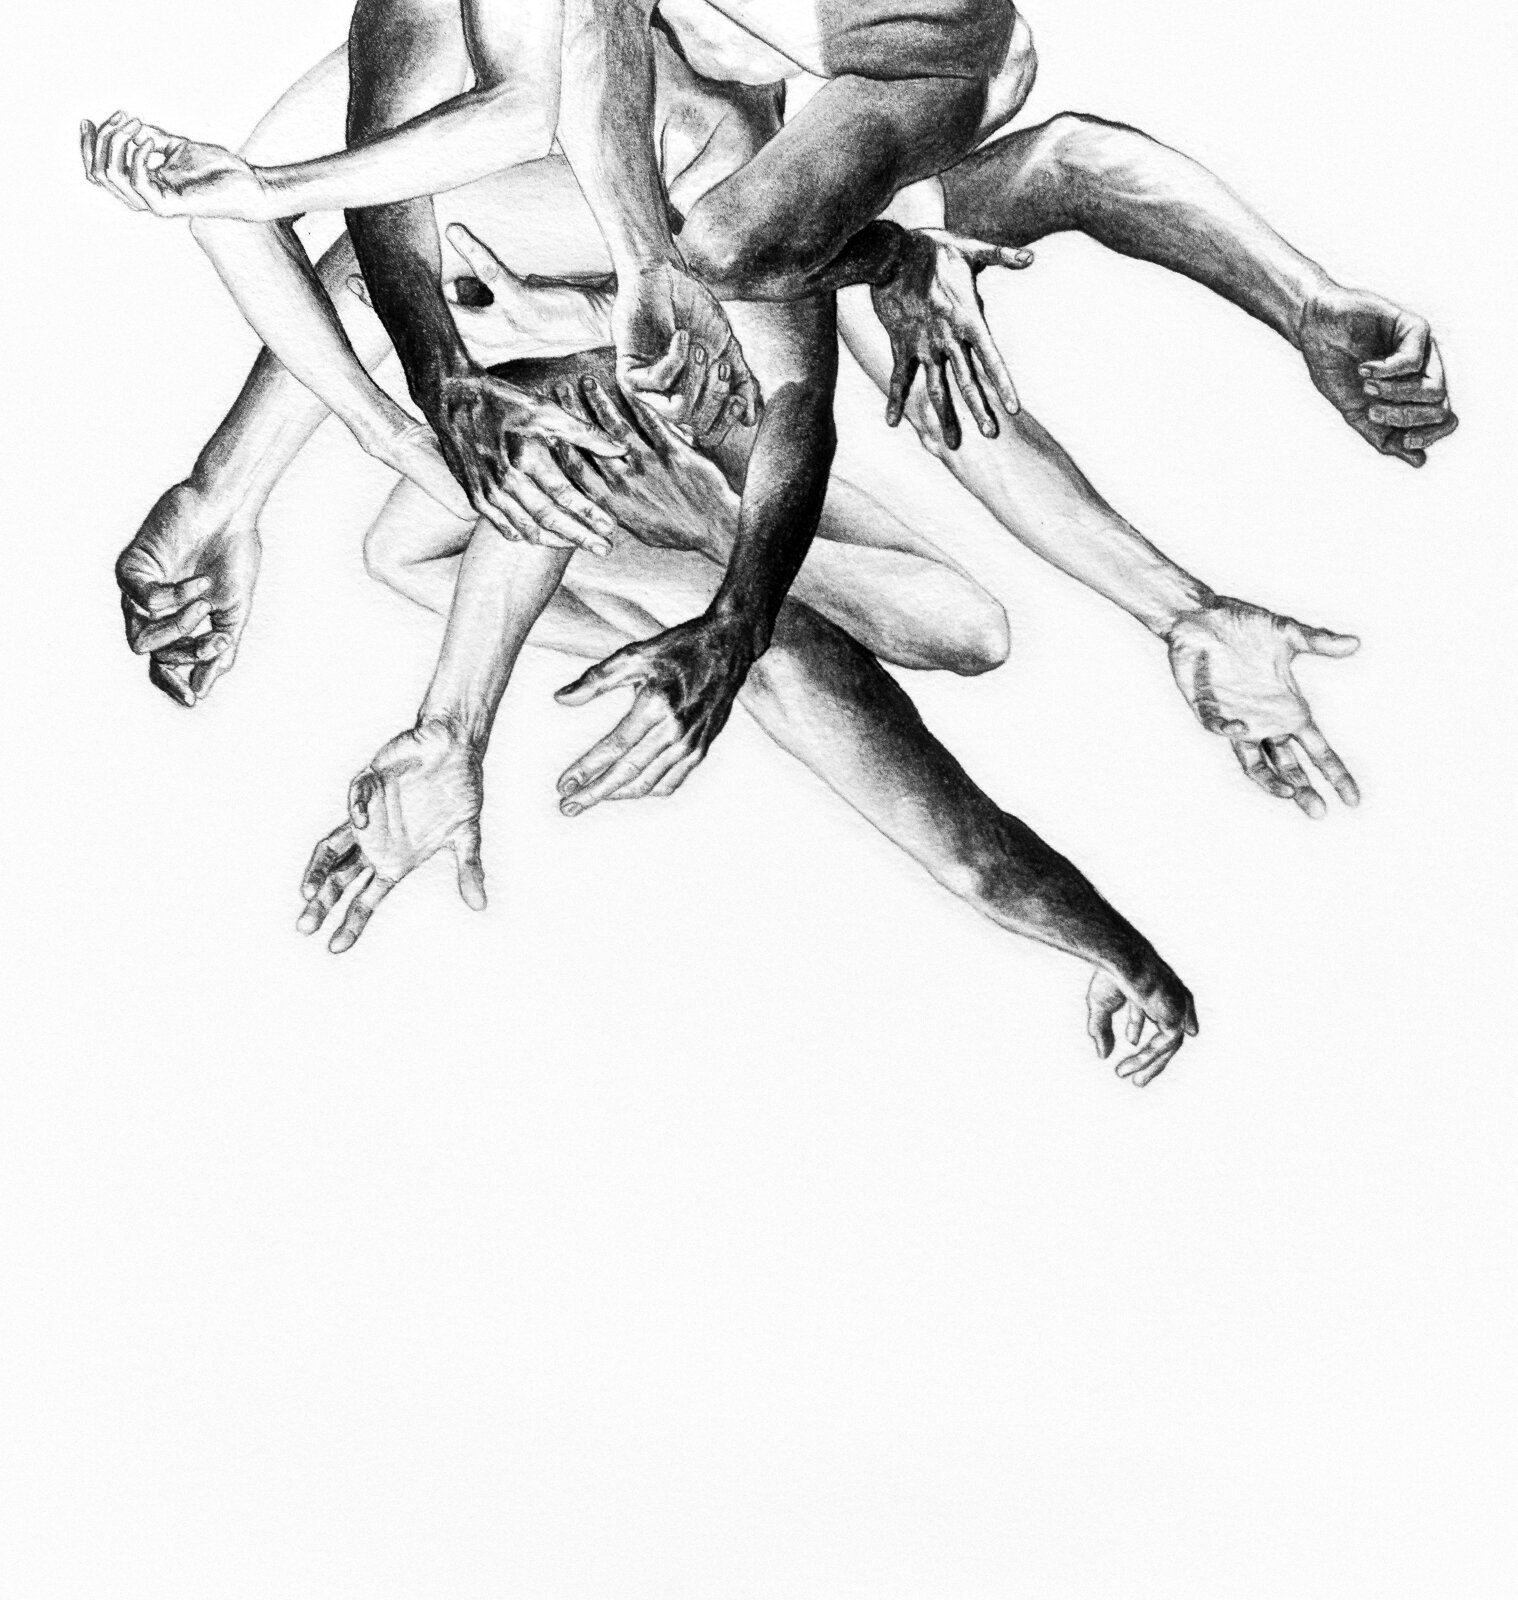 MEDUSA I - SOLD | 8 X 8 INCHES | GRAPHITE AND INK ON PAPER | 2012